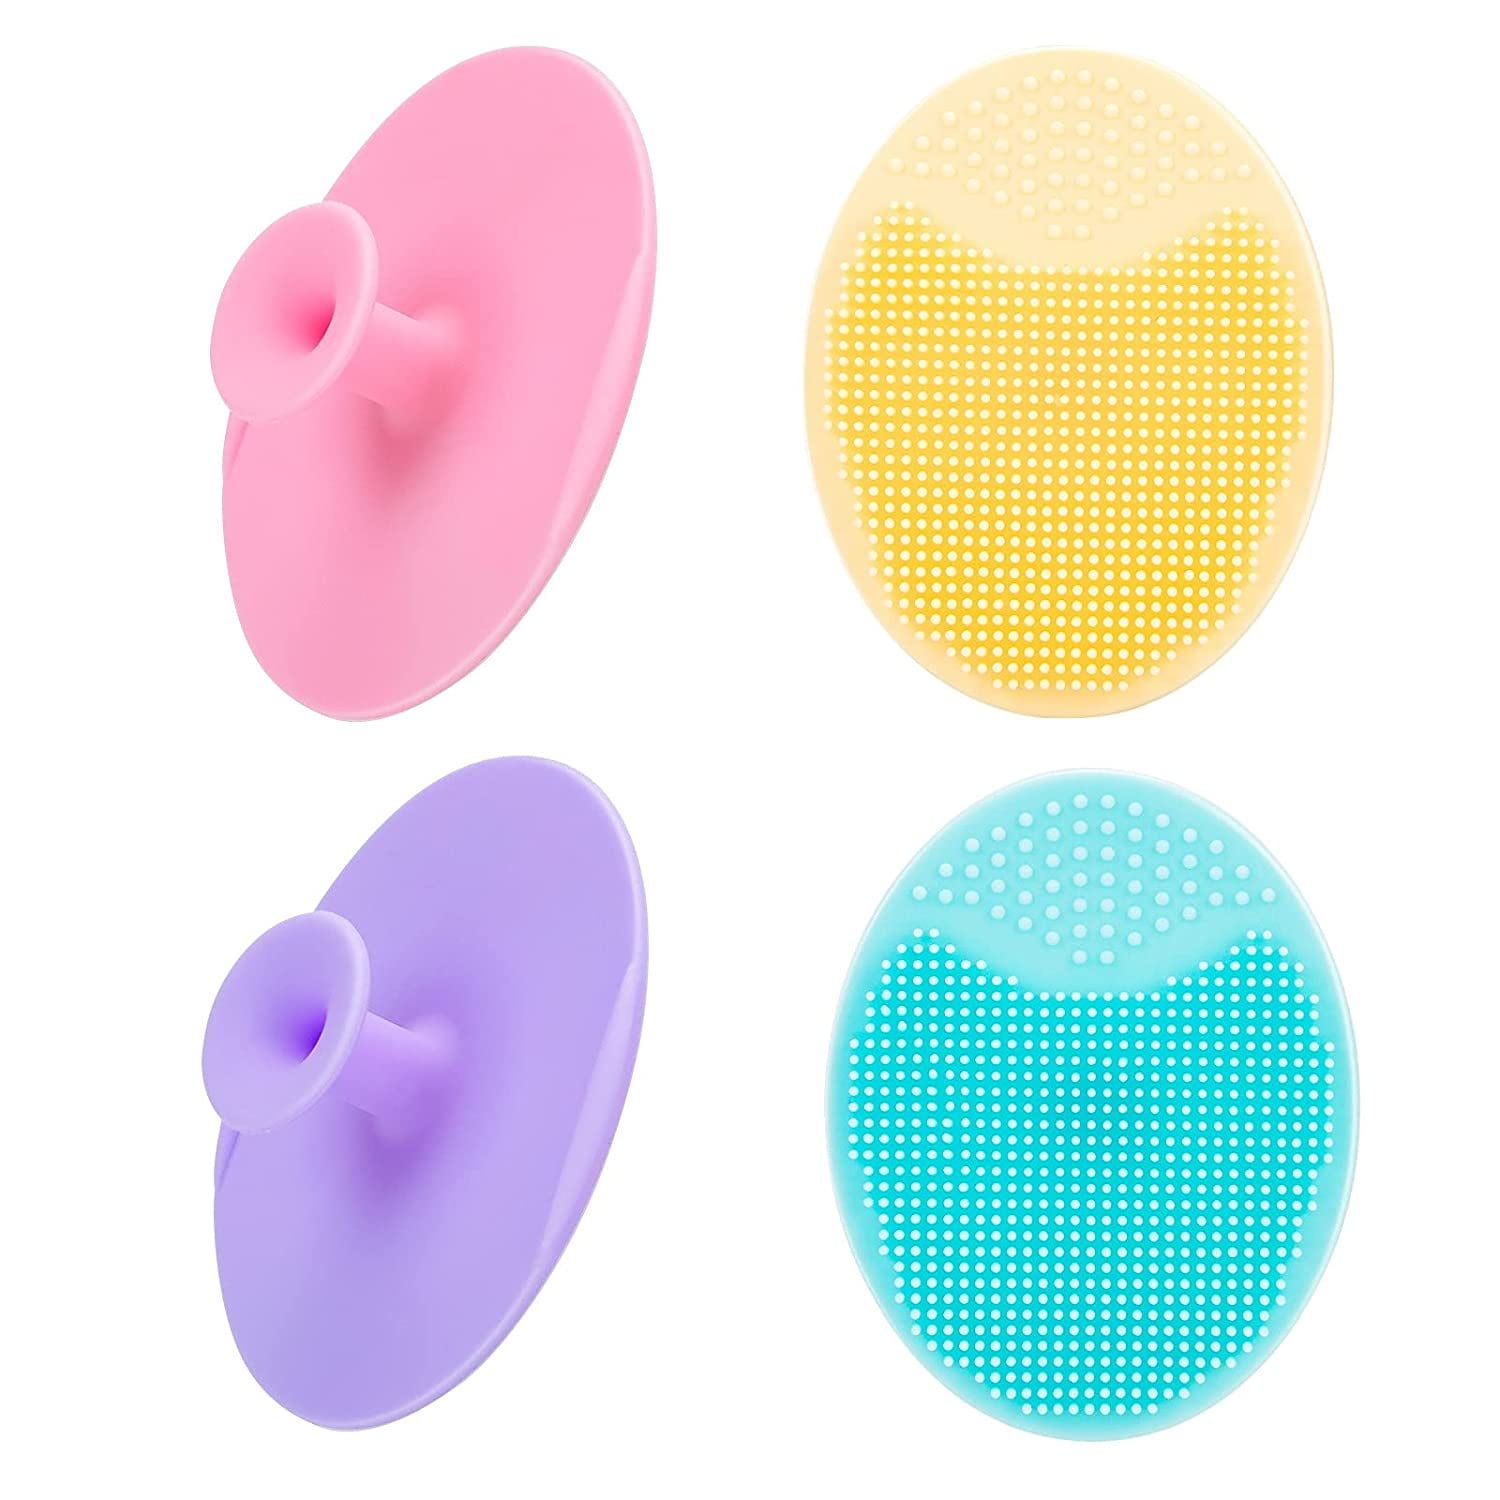 Sebum Sweeper Pore Cleansing Silicone Brush